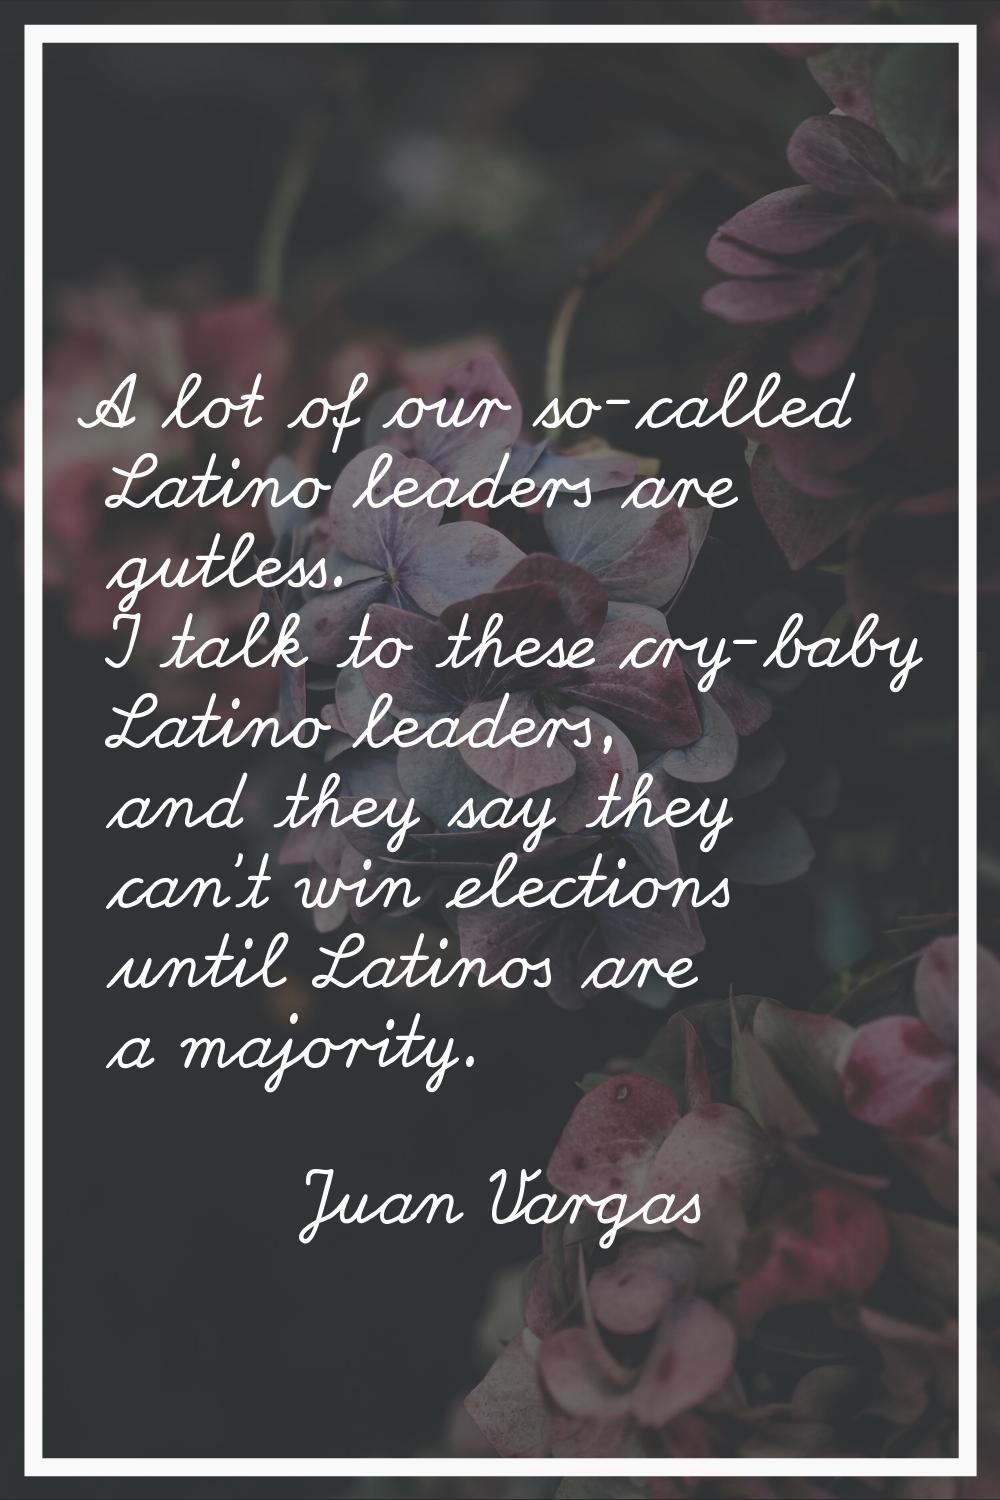 A lot of our so-called Latino leaders are gutless. I talk to these cry-baby Latino leaders, and the